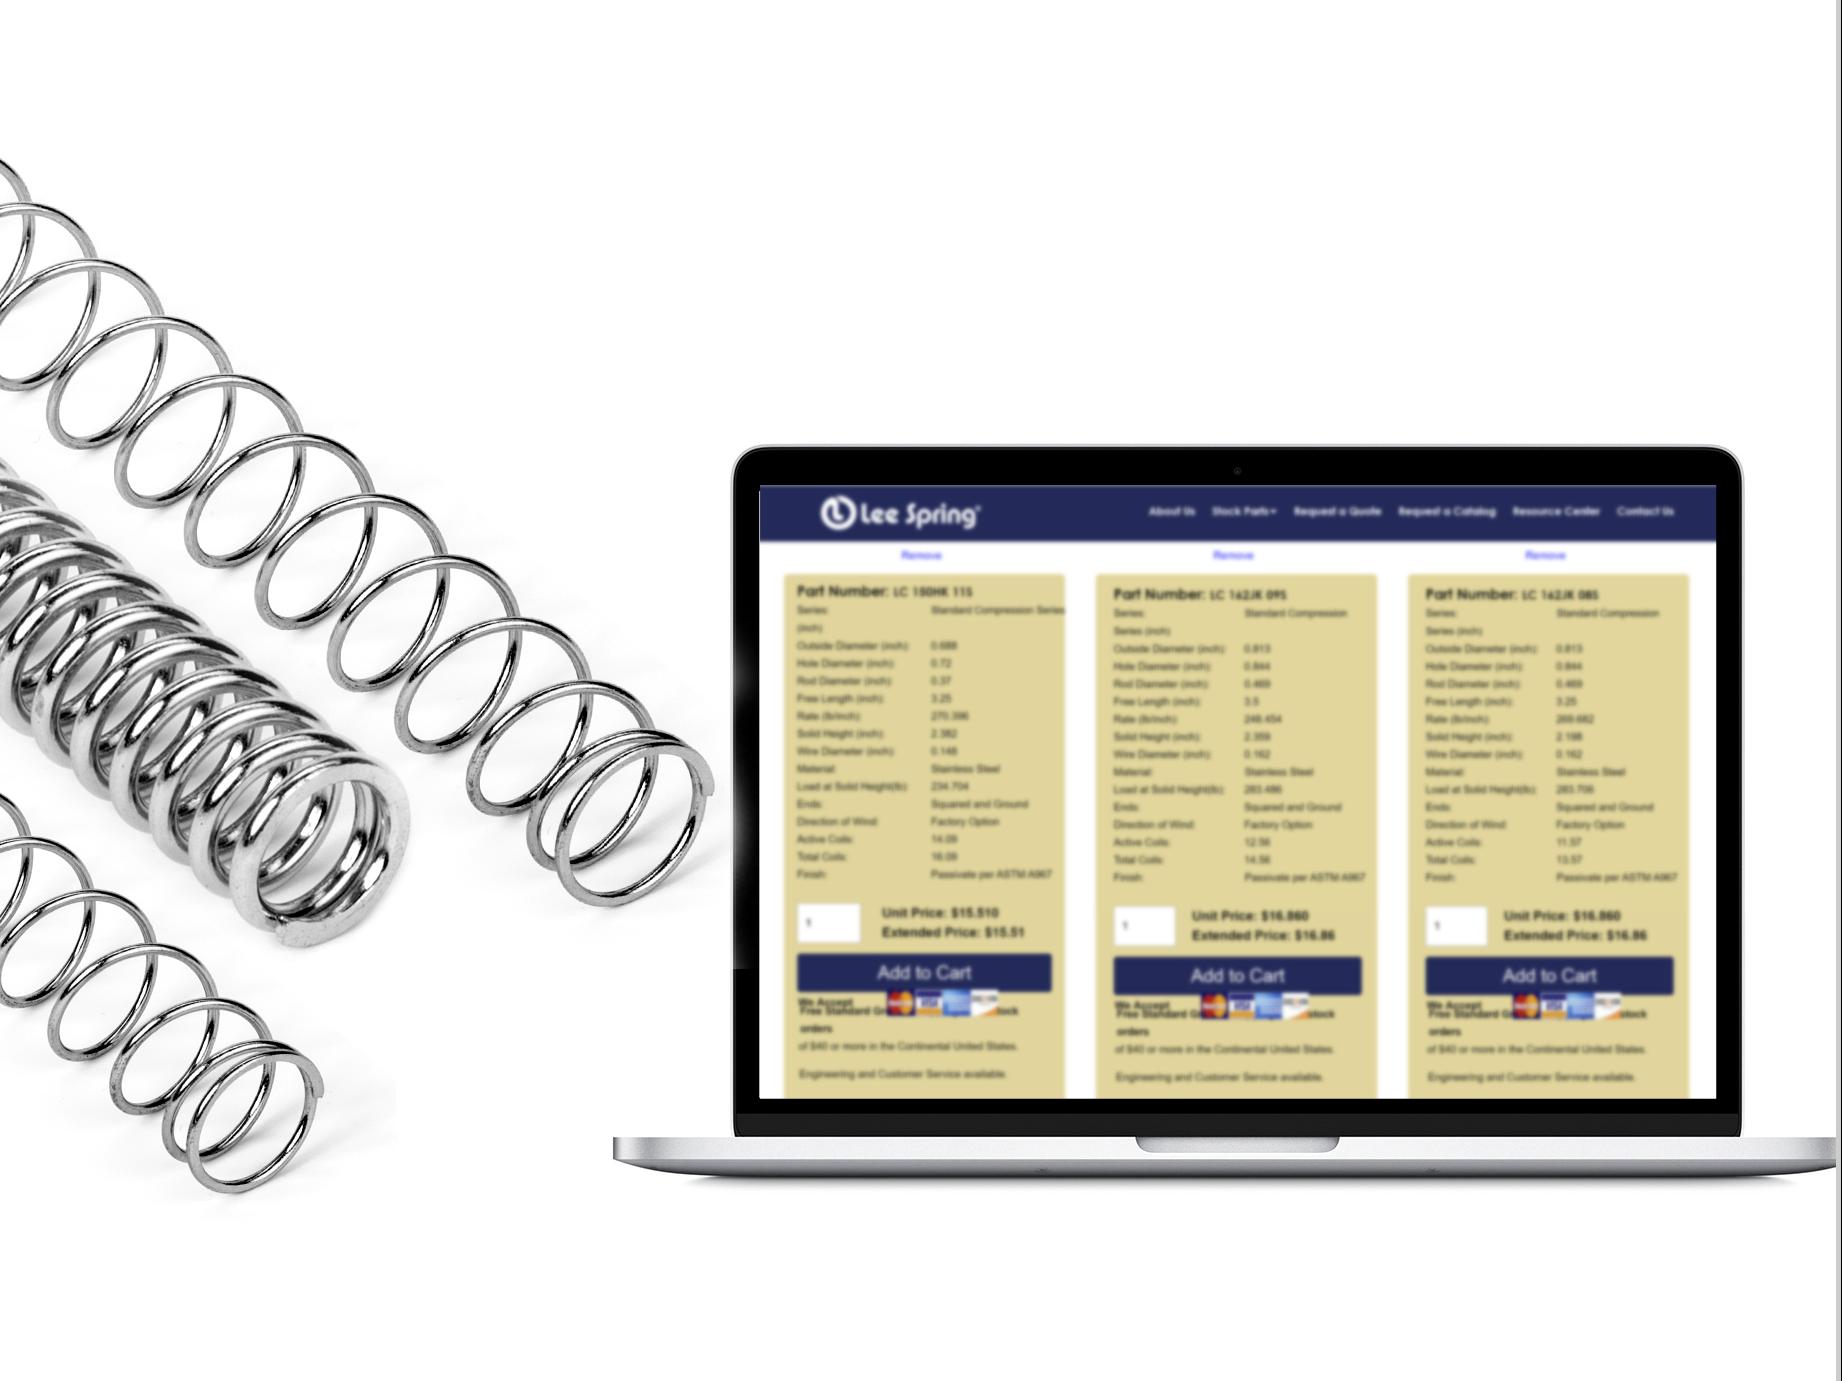 Easily find and compare springs online